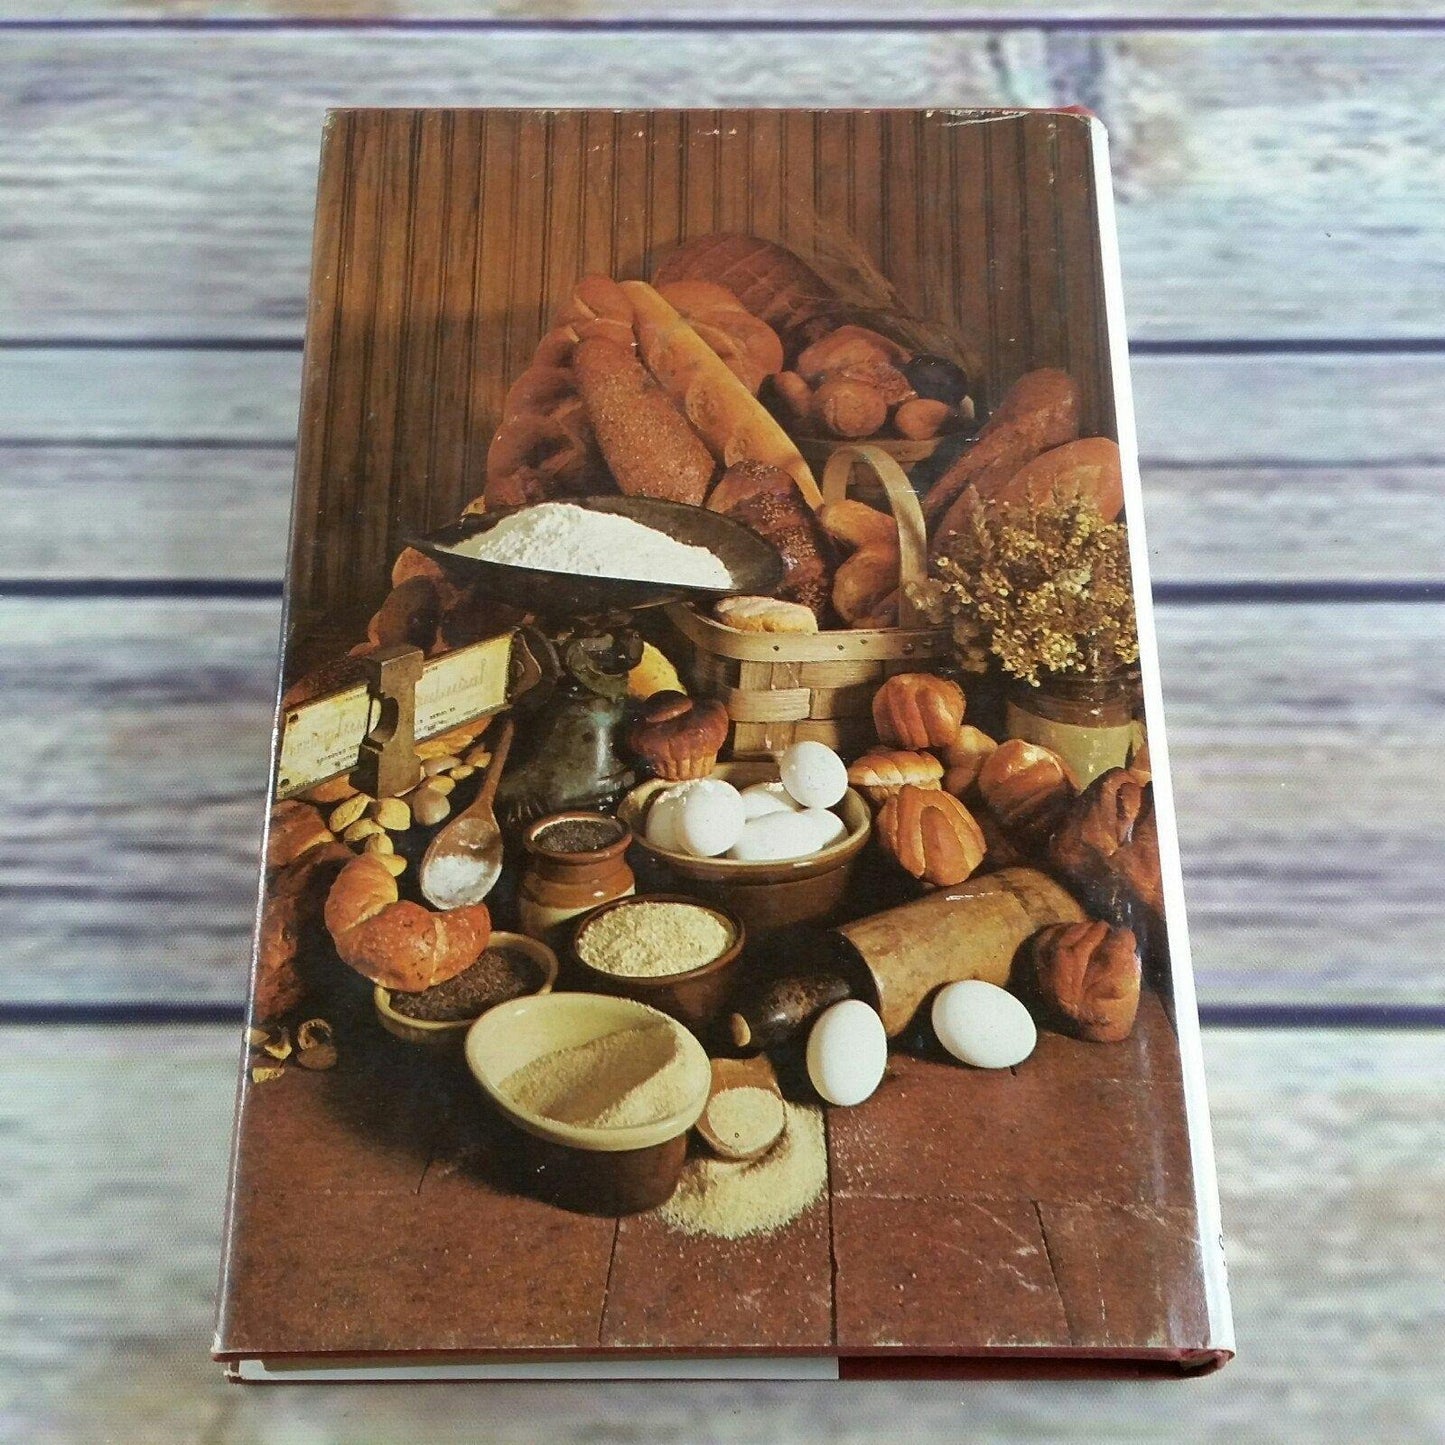 Vintage Cookbook Uncle Johns Original Bread Recipes 1965 Hardcover with Dust Jacket 250 Recipes John Rahn Braue Quick Breads Yeast Breads